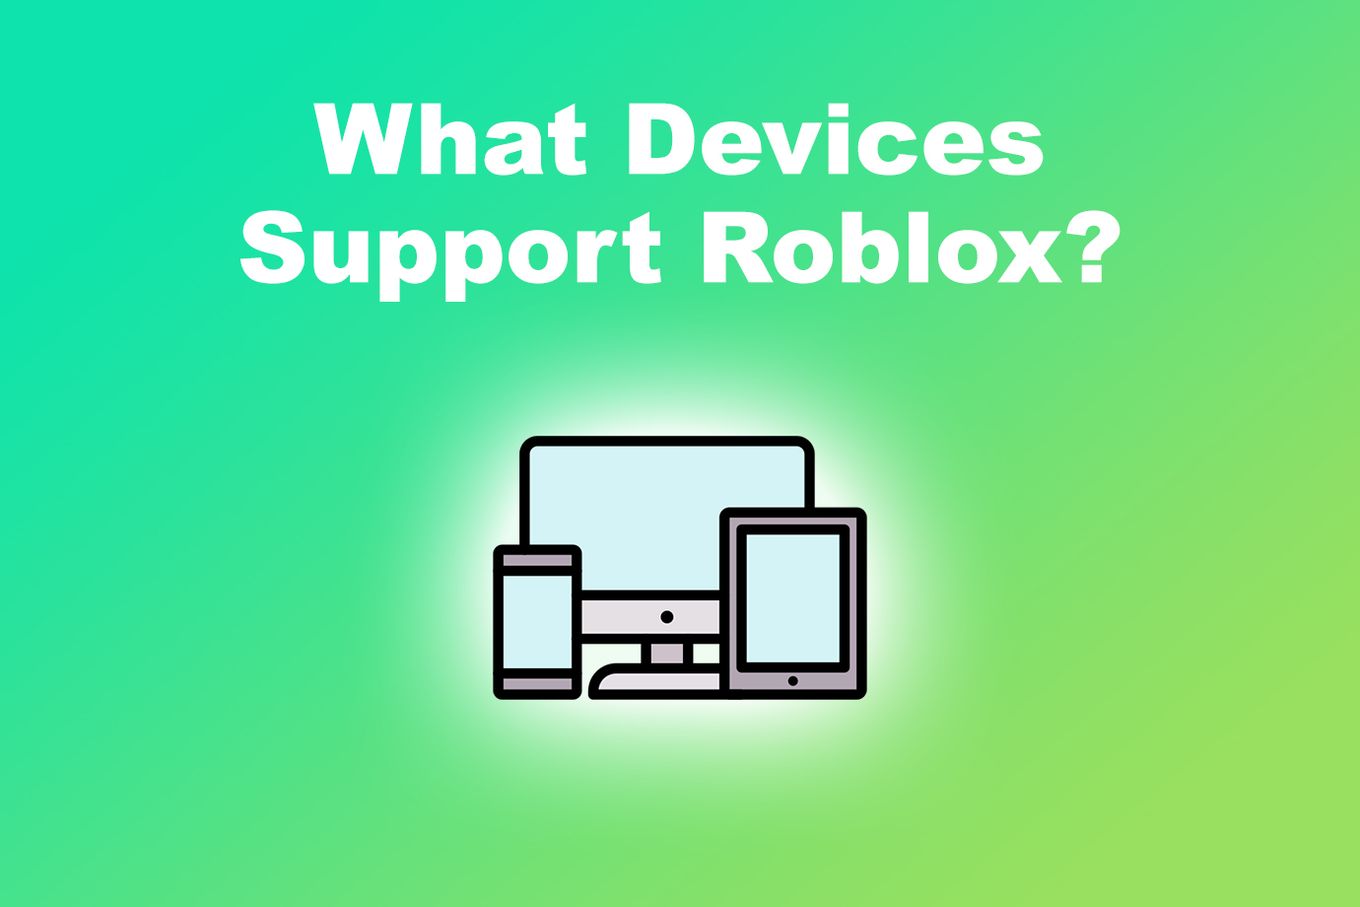 What Devices Support Roblox?